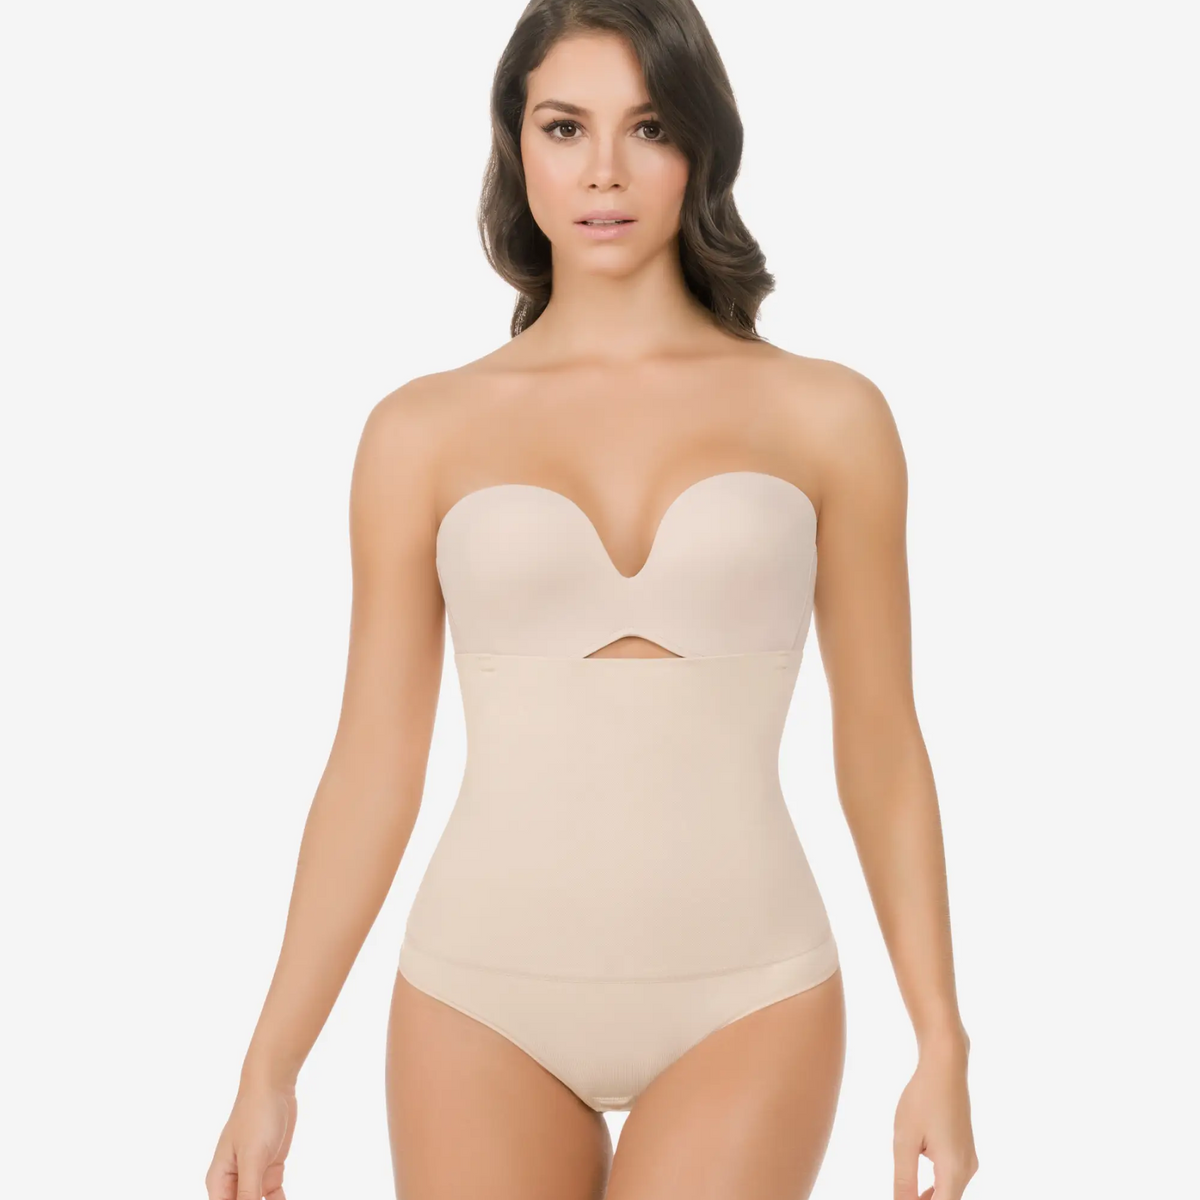 Fajas Colombianas Body Suit Thong Woman Girdle Thermal Shaper Post Surgery  1596